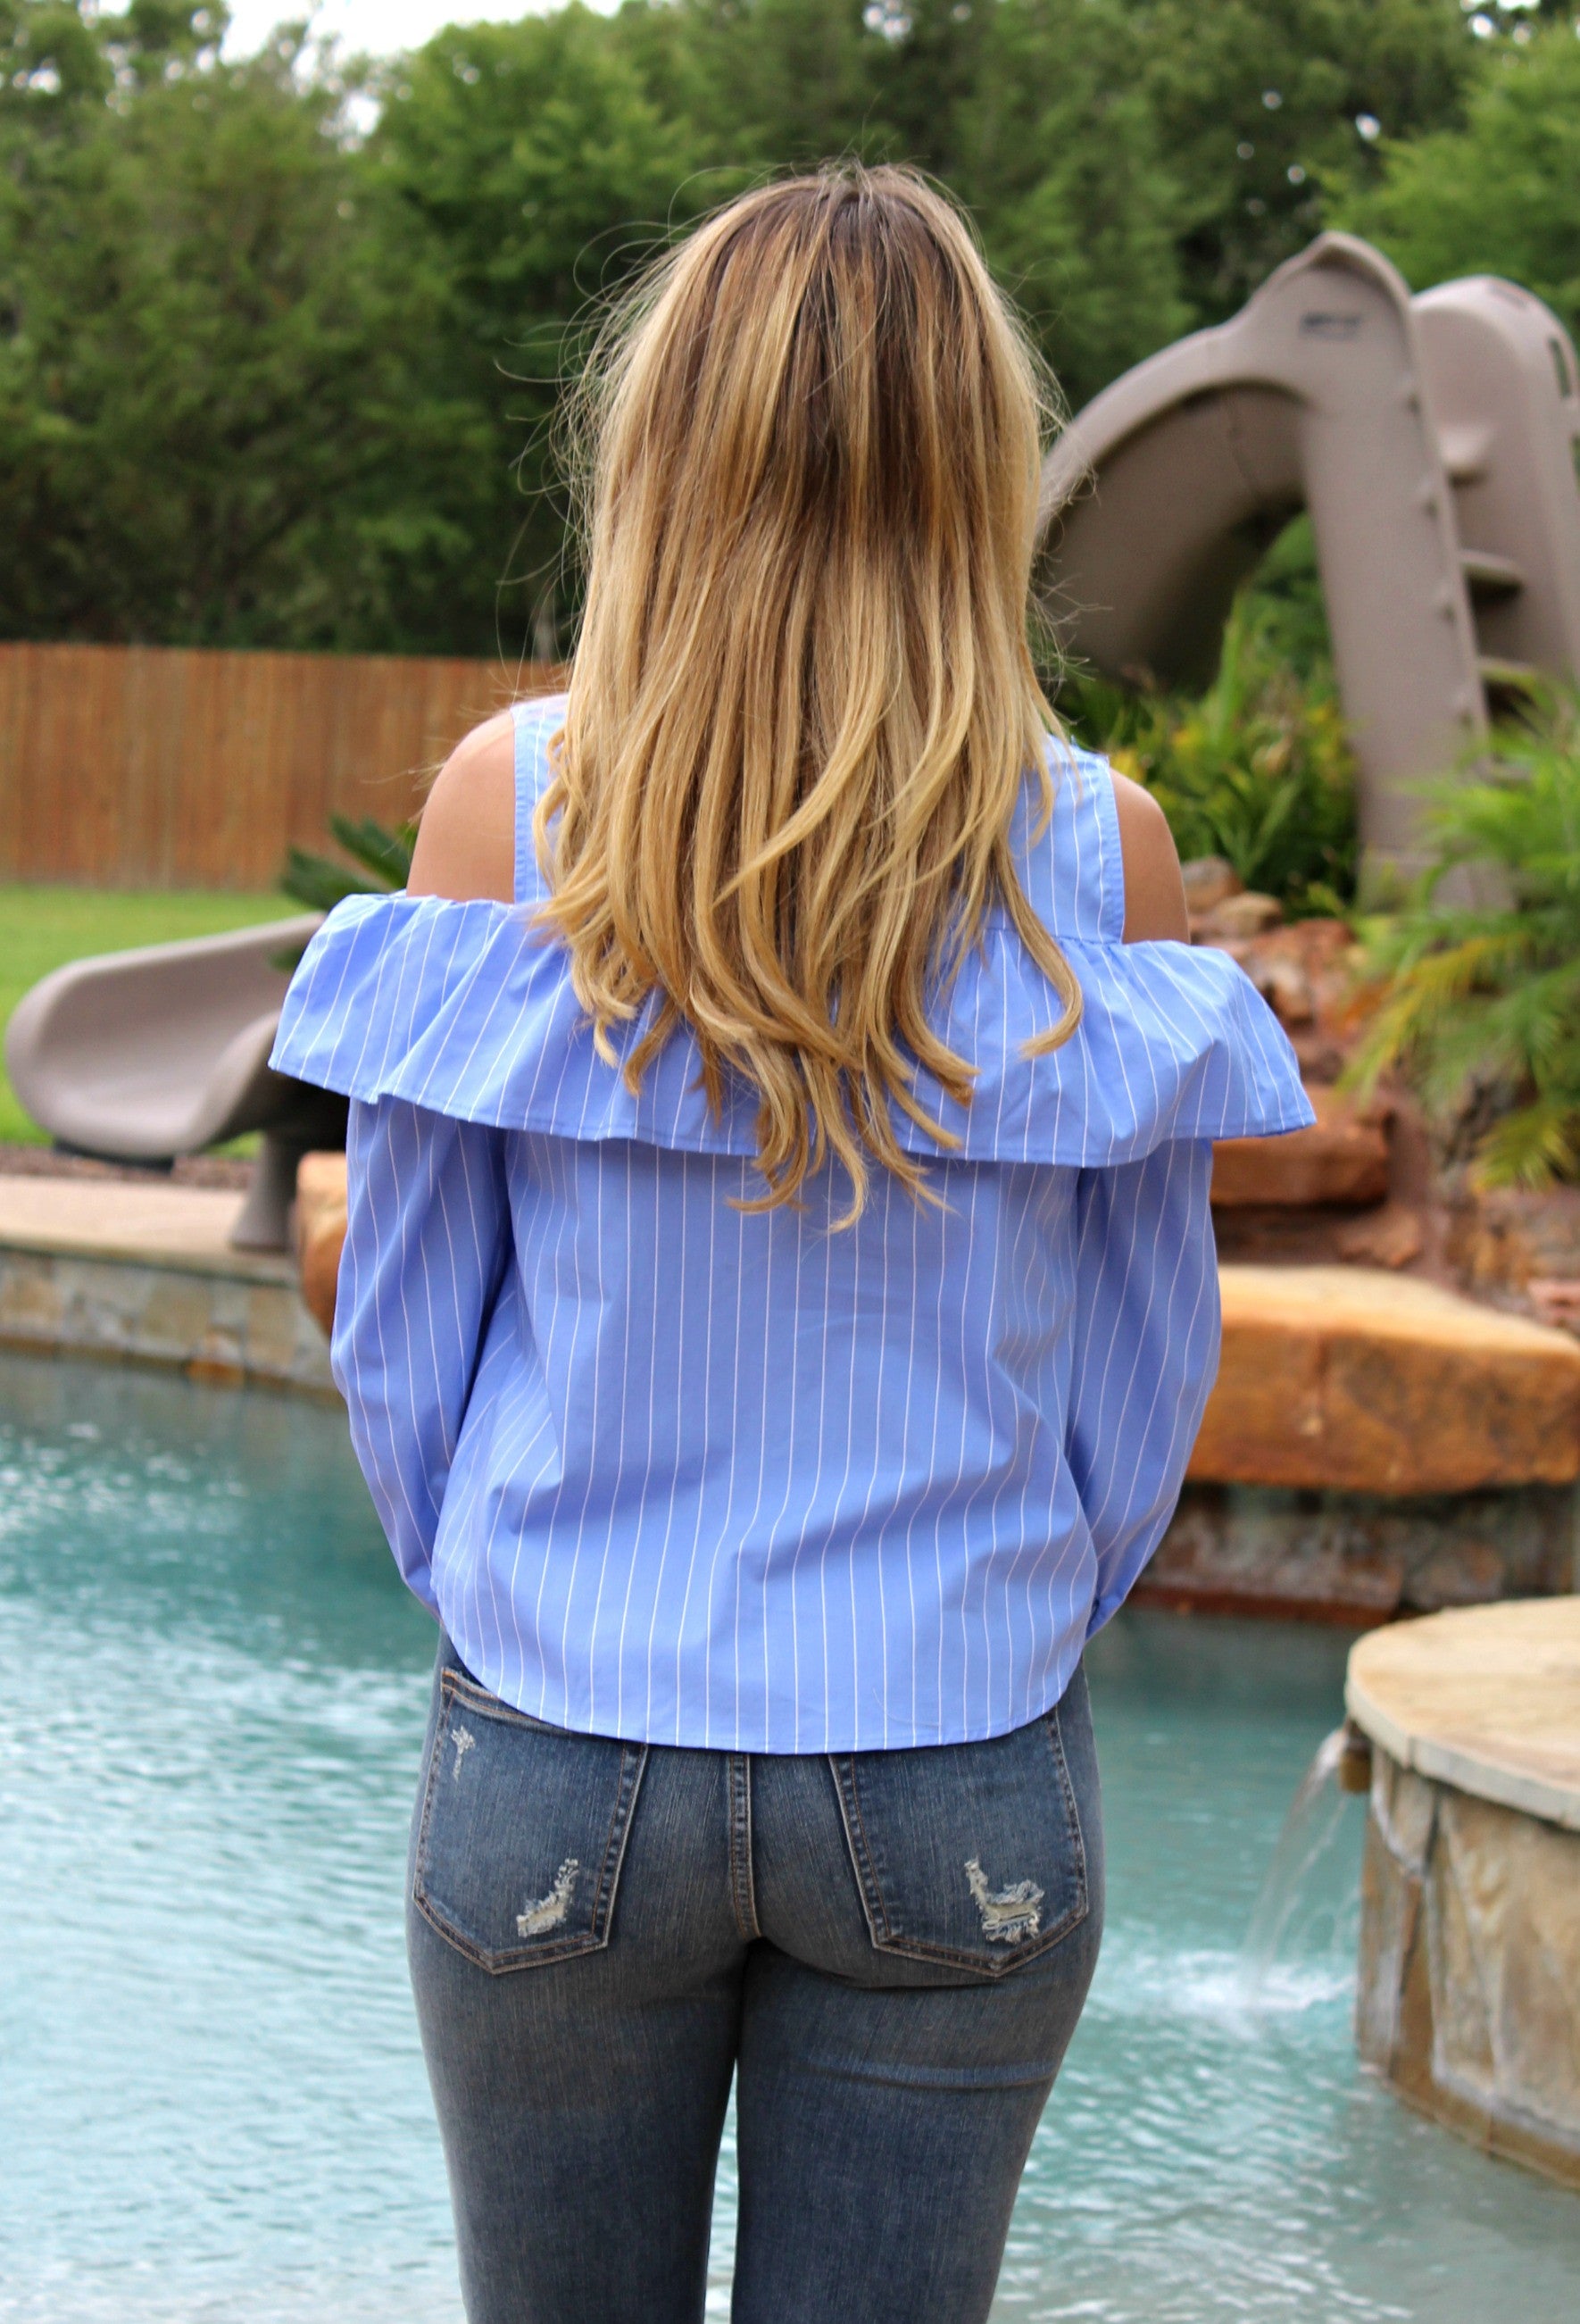 Chic Chick Stripe Open Shoulder Ruffle Top in Blue - Giddy Up Glamour Boutique